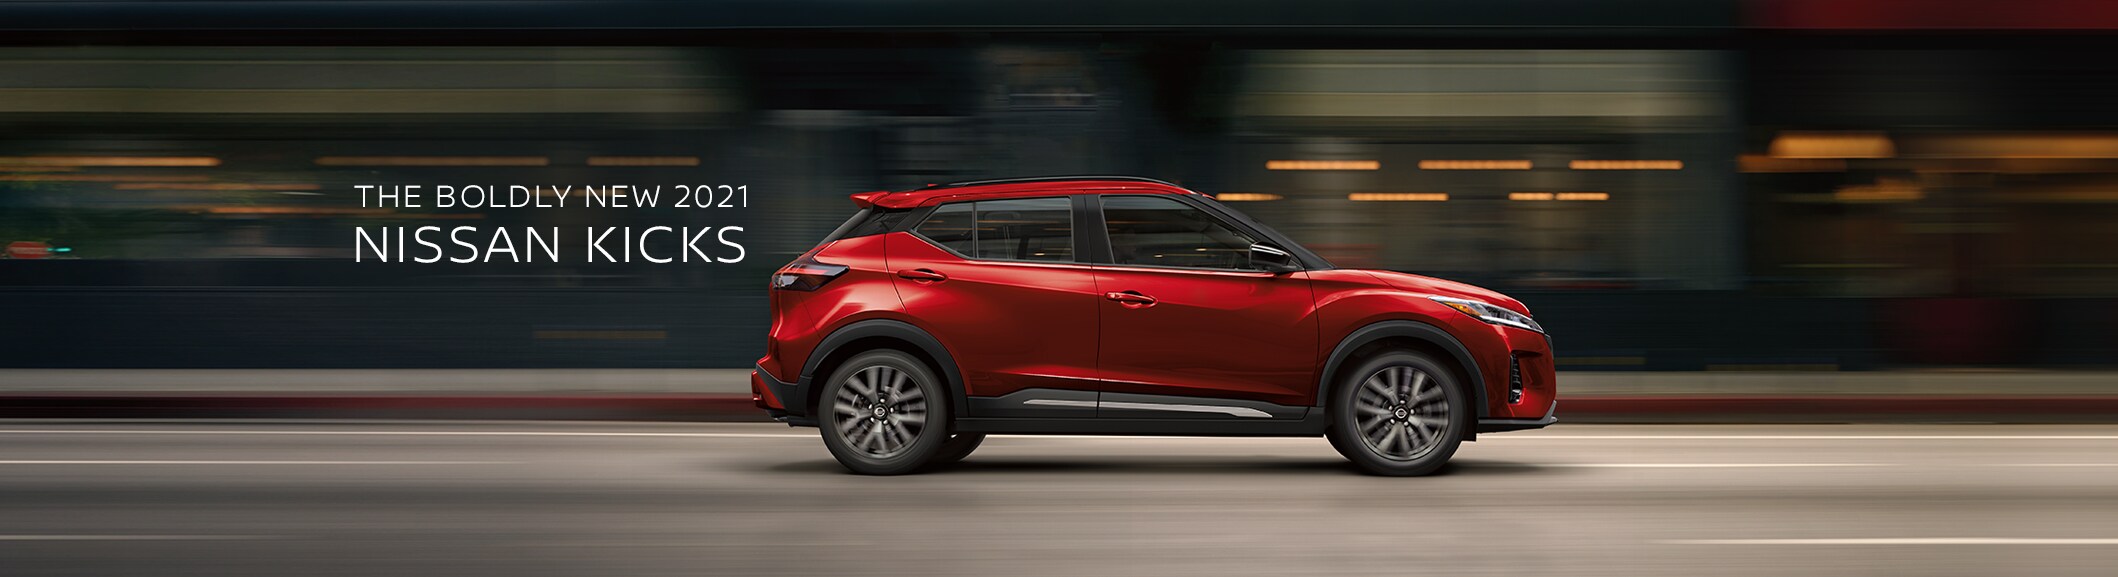 Side View of Red Nissan Kicks SUV in motion